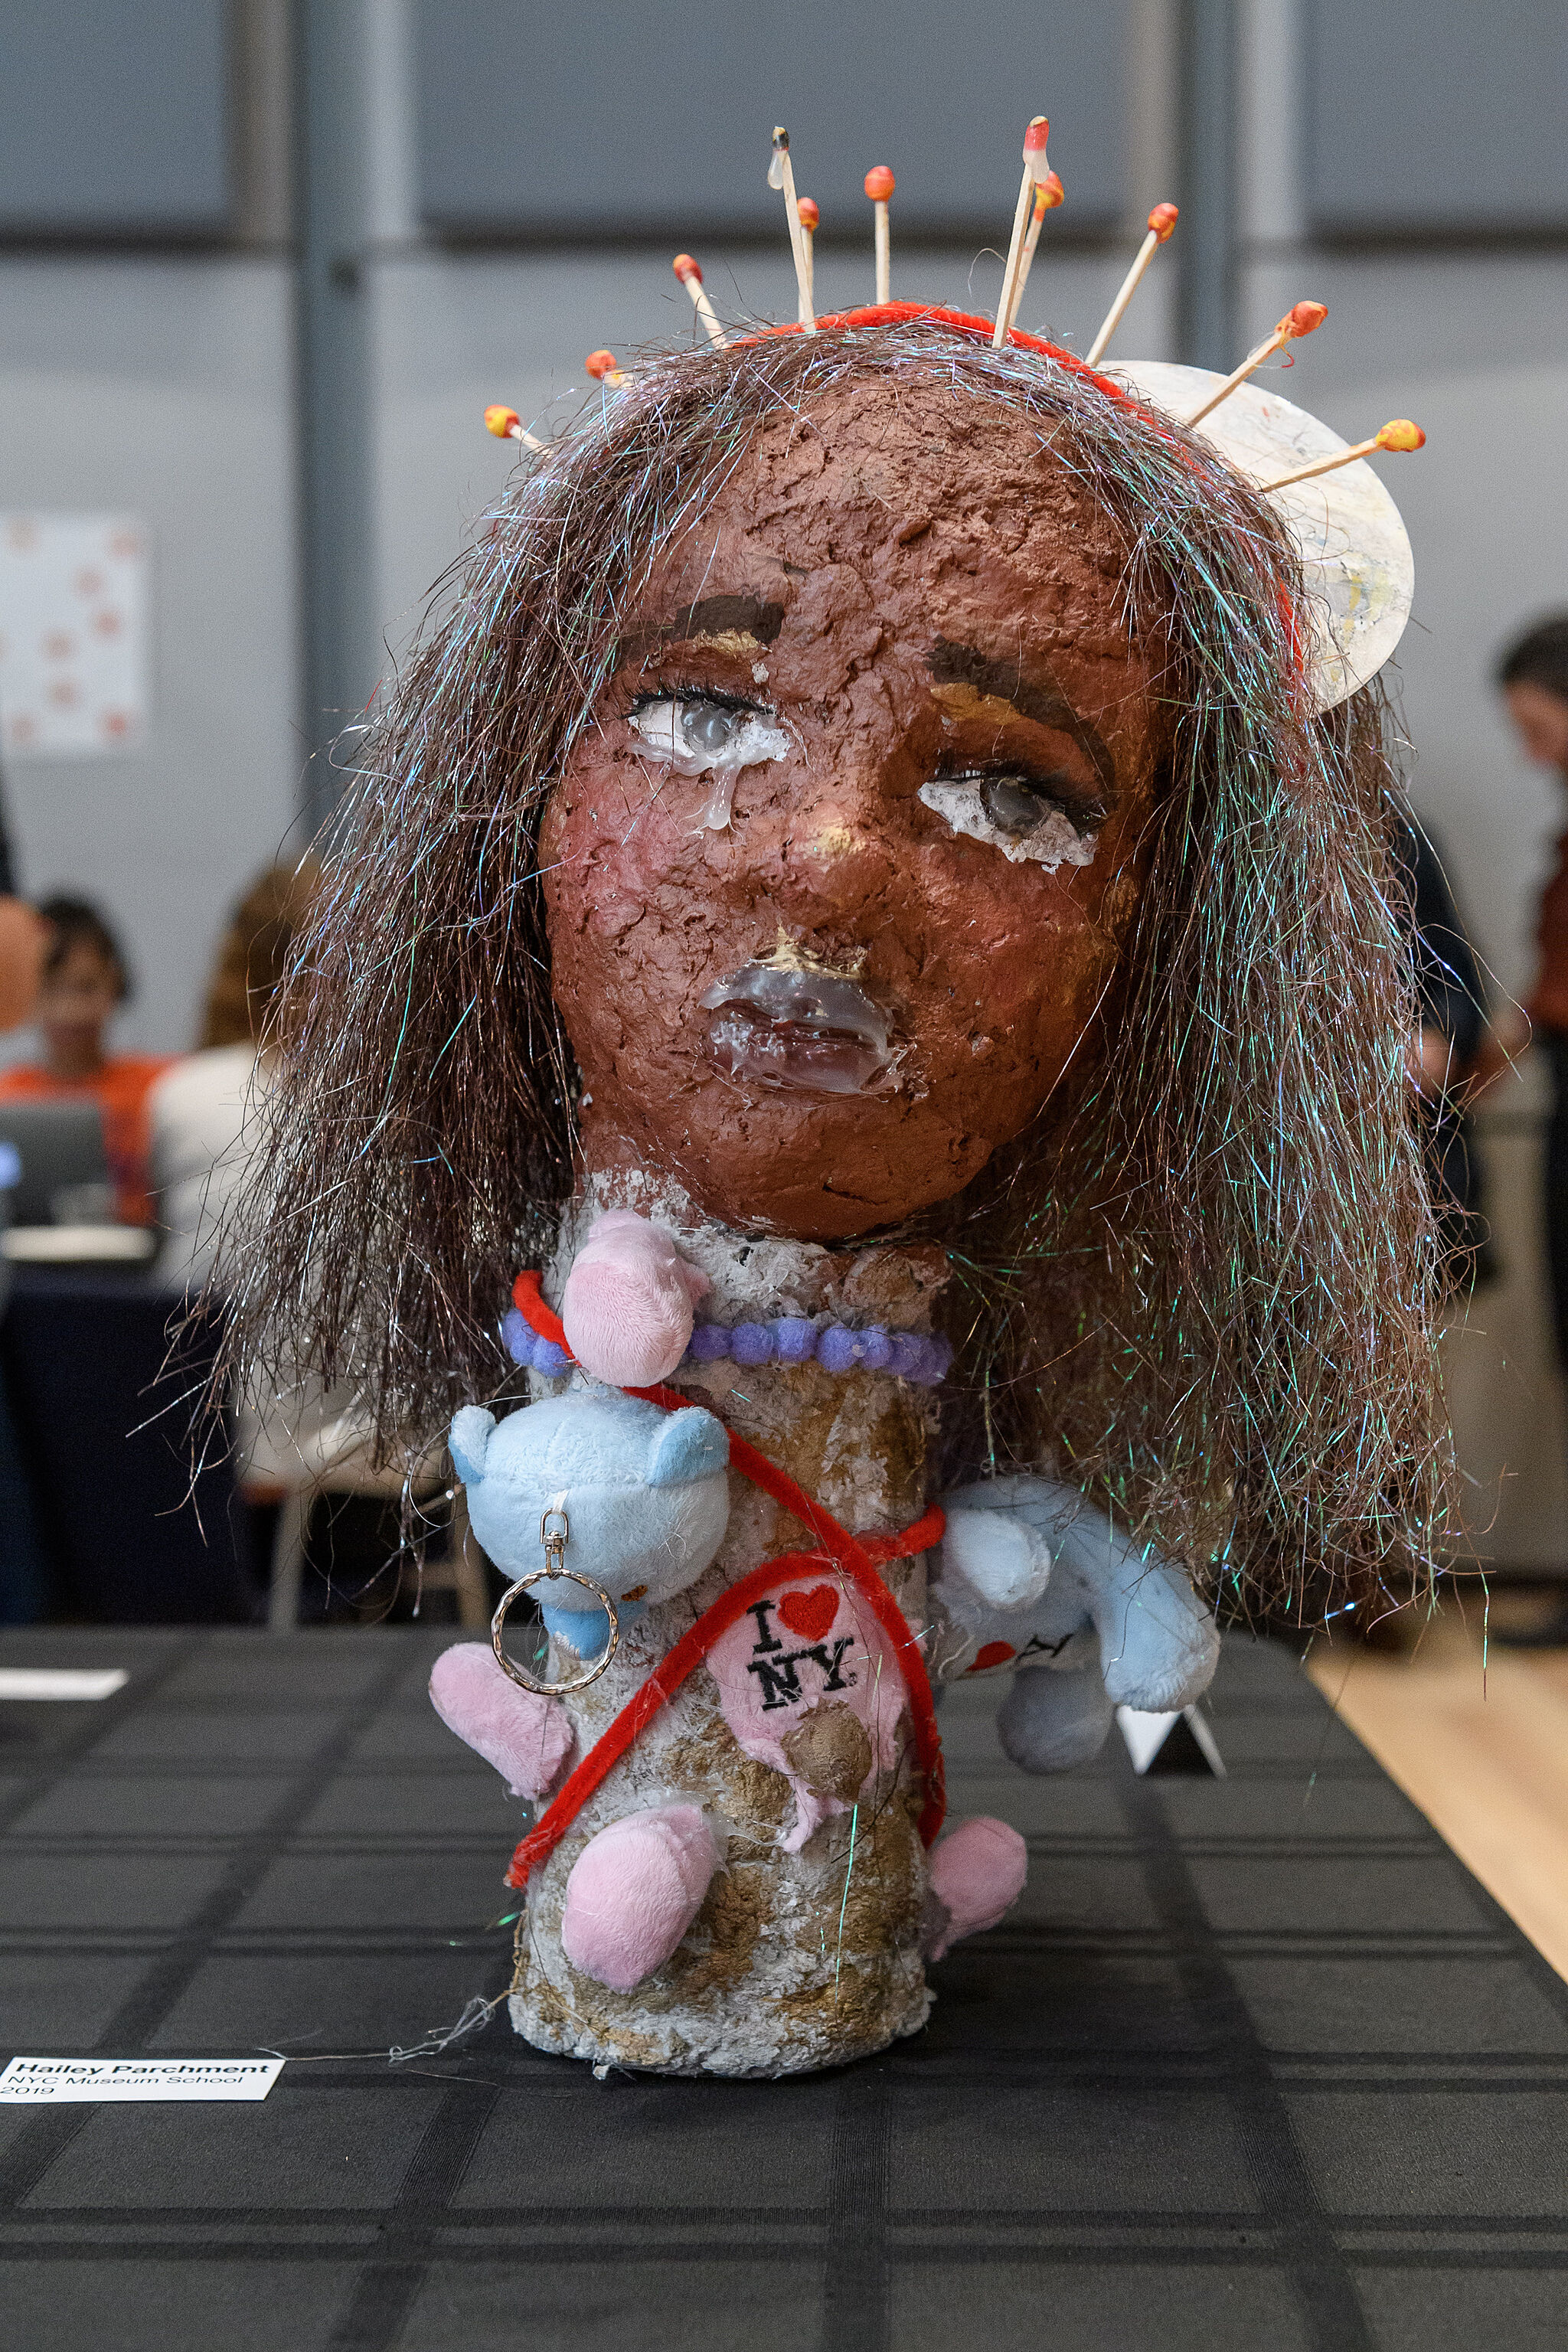 YI Artist, Hailey, displays her mixed media sculpture, spring 2019